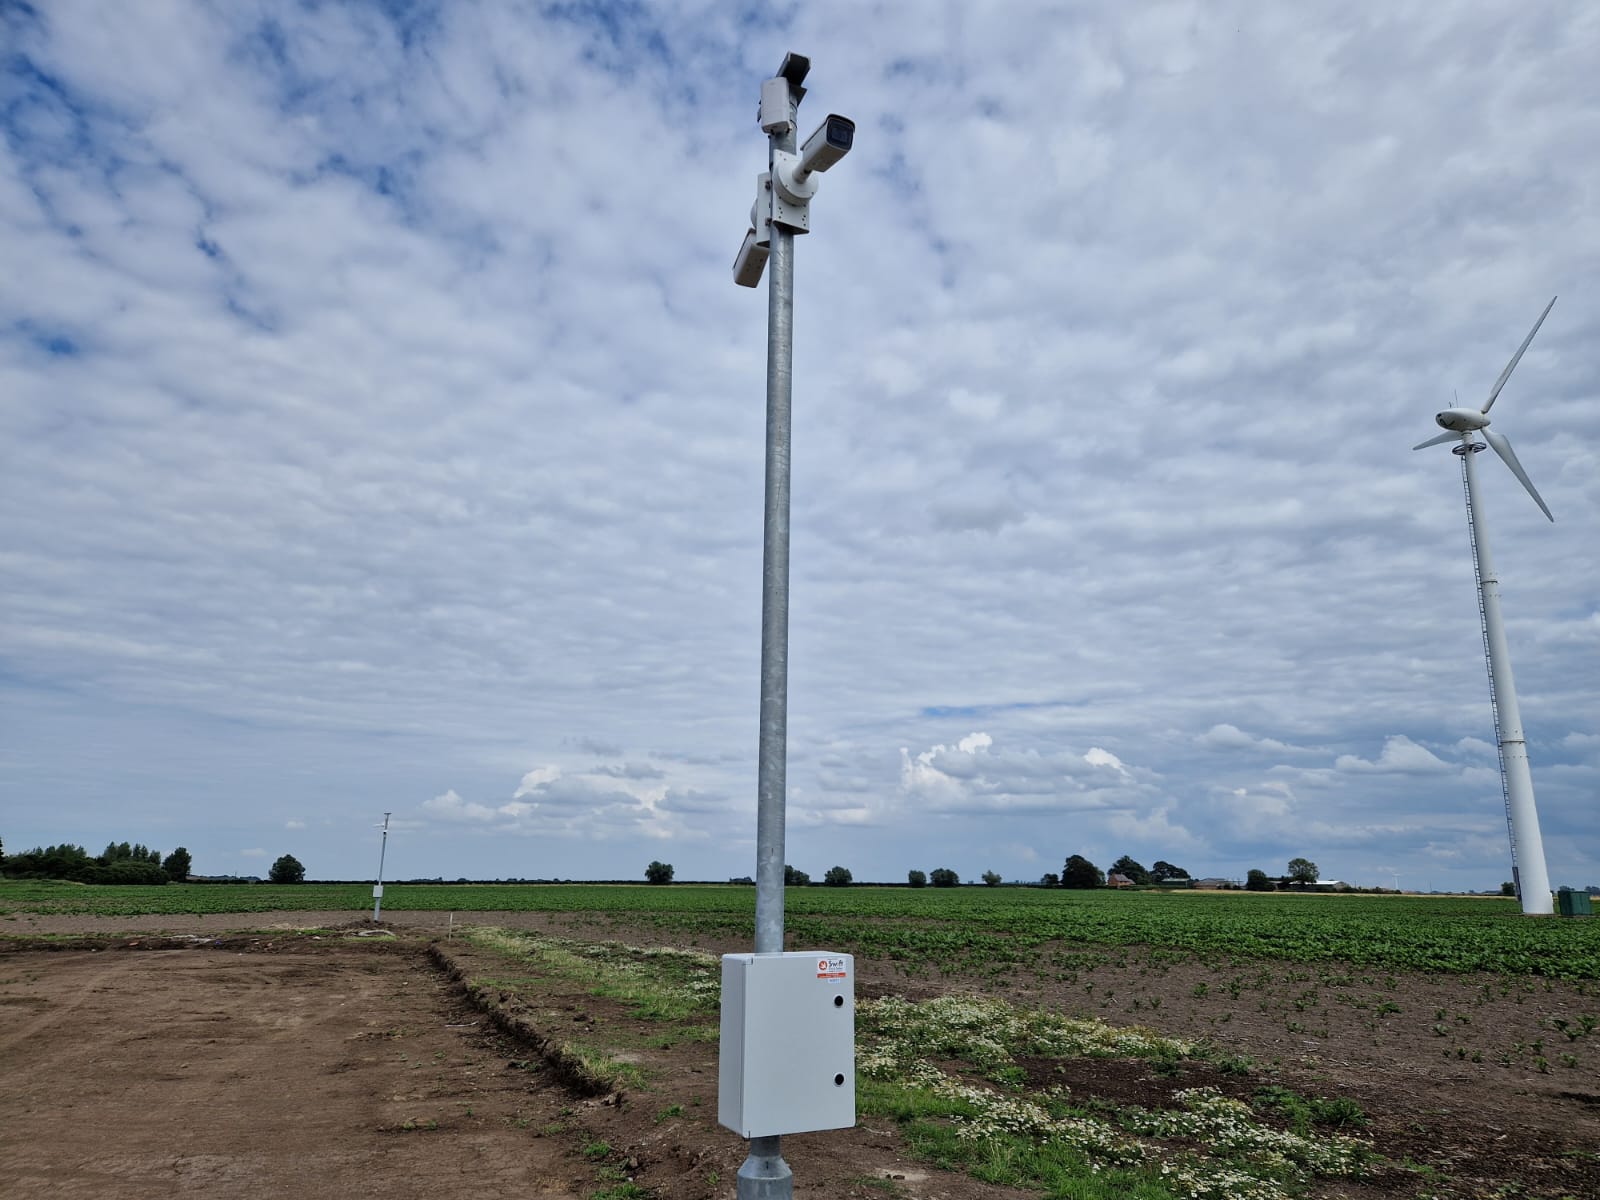 Image of a CCTV camera system in a field, next to a wind turbine